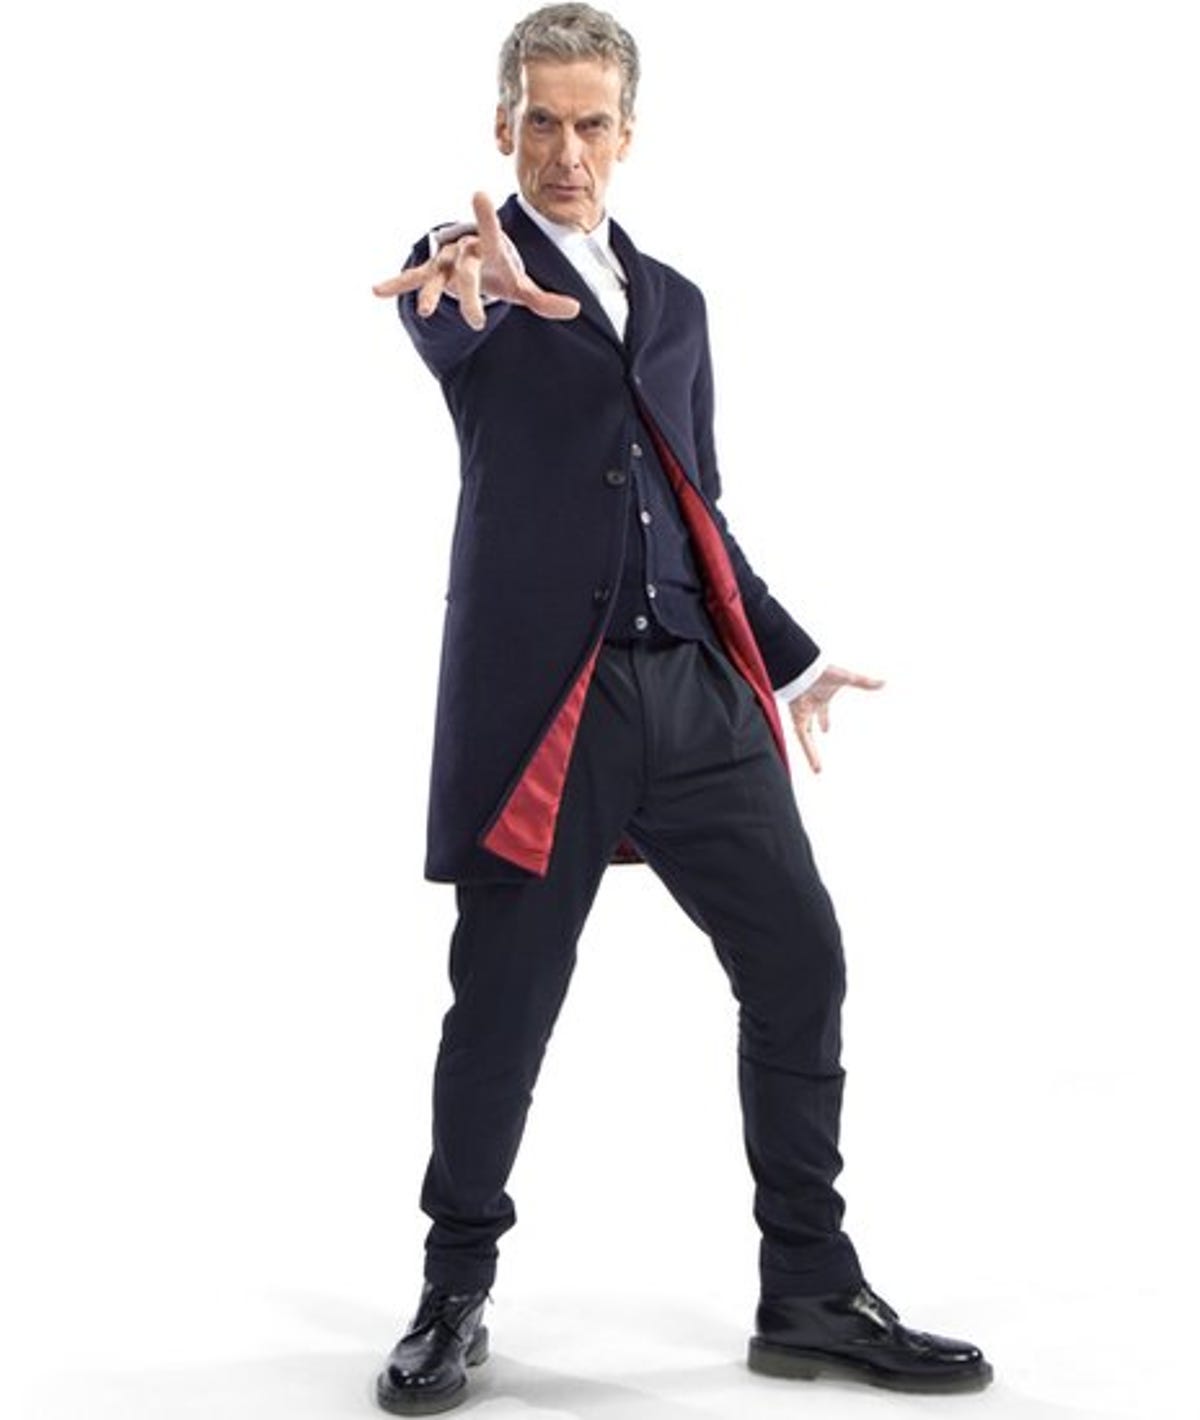 This Doctor wears Dr. Martens! BBC One reveals actor Peter Capaldi's new look for his version of the beloved 